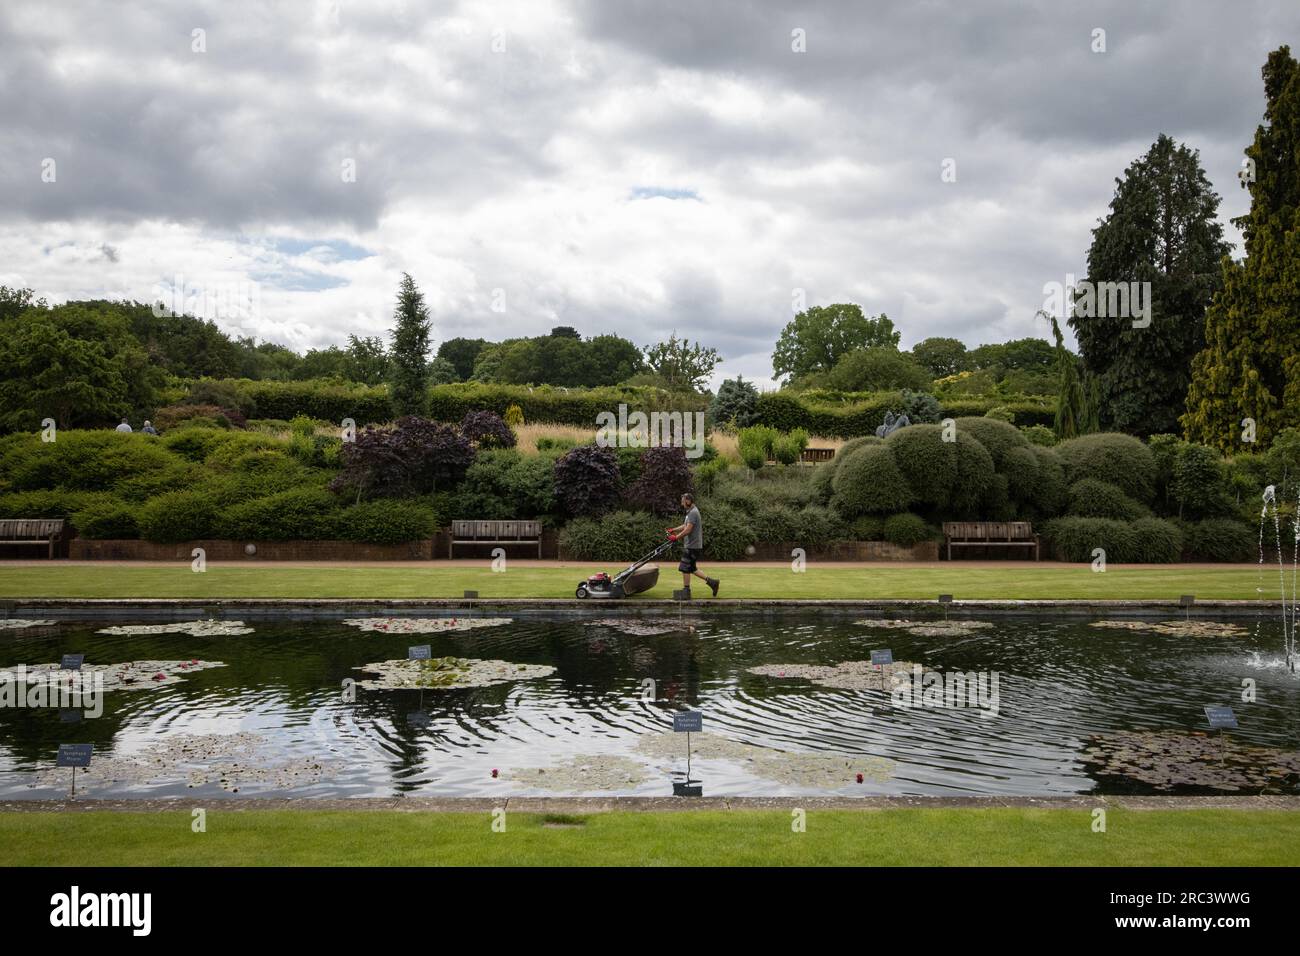 A gardener mows the lawn surrounding the water lily pond, Jellicoe Canal, in the grounds of RHS Wisley, Surrey, England, United Kingdom Stock Photo